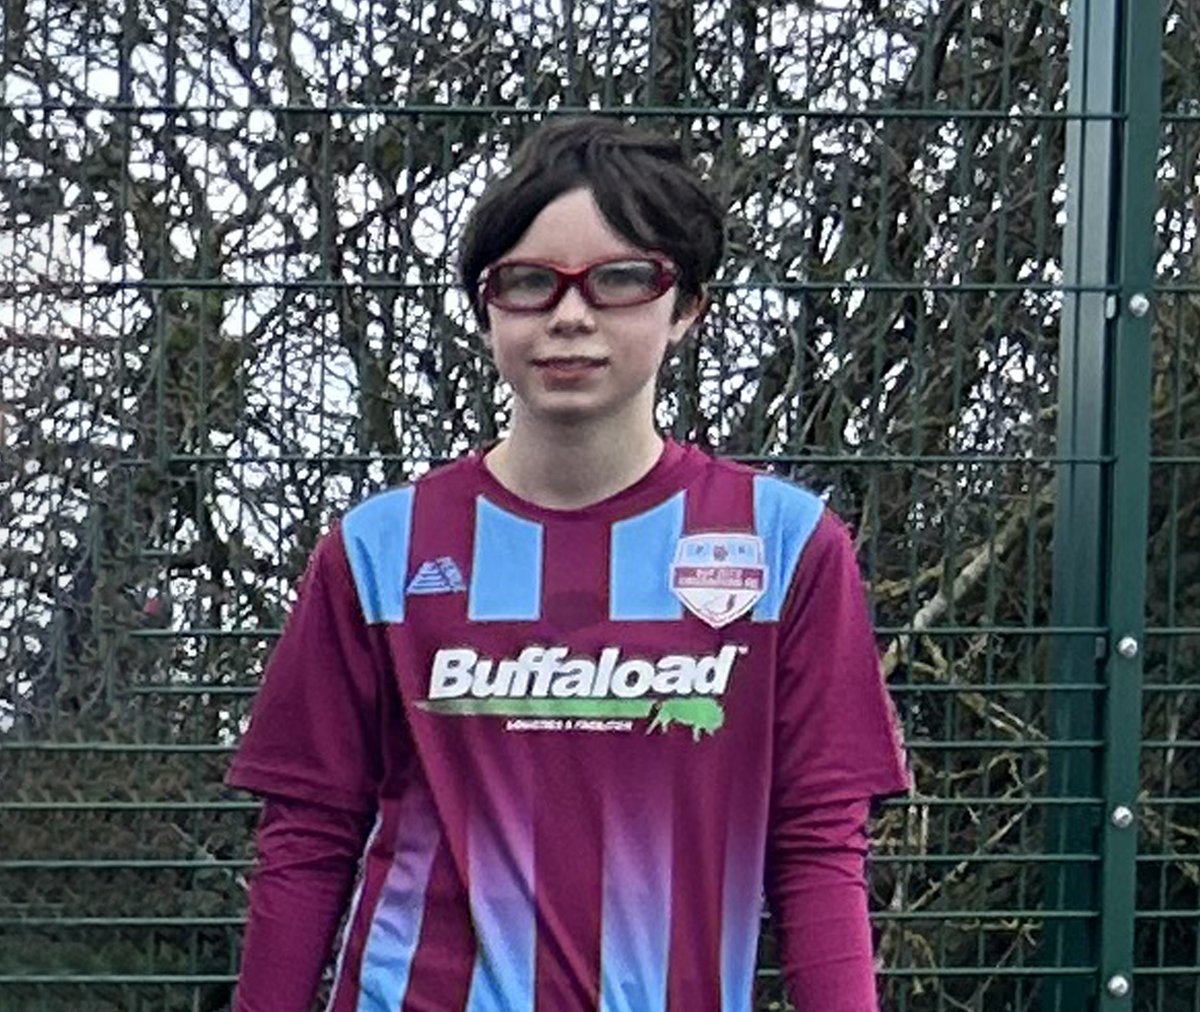 Ely City Crusaders U15 girls football team play away at Coton (Cambs) Great improvement in the team this season, clear progress in teamwork and taking the ball forward. Sadly they lost, they've got so much spirit! 3rd photo is Player of the Match, Ohdran. #football #girlsfootball